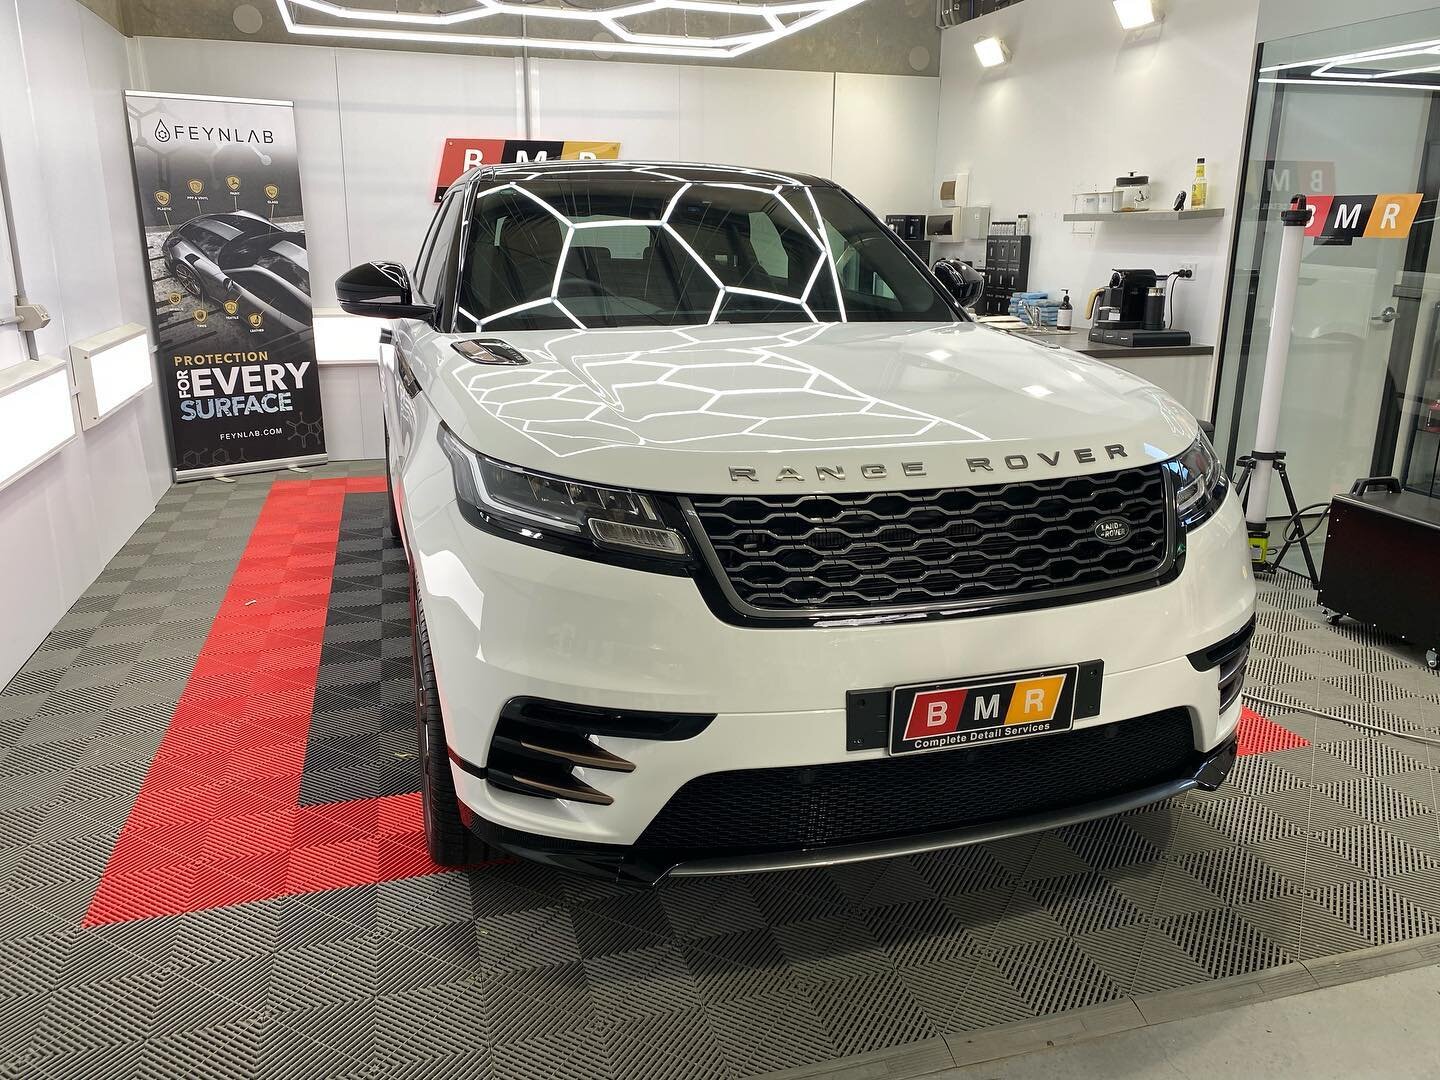 Range Rover Velar complete Feynlab Protection Package. After paint correction we laid down Feynlab Heal Lite with partial self heal ability. All wheels &amp; glass protected. Interior received a textile coating on seats and mats 
&bull;
&bull;

#bmrd